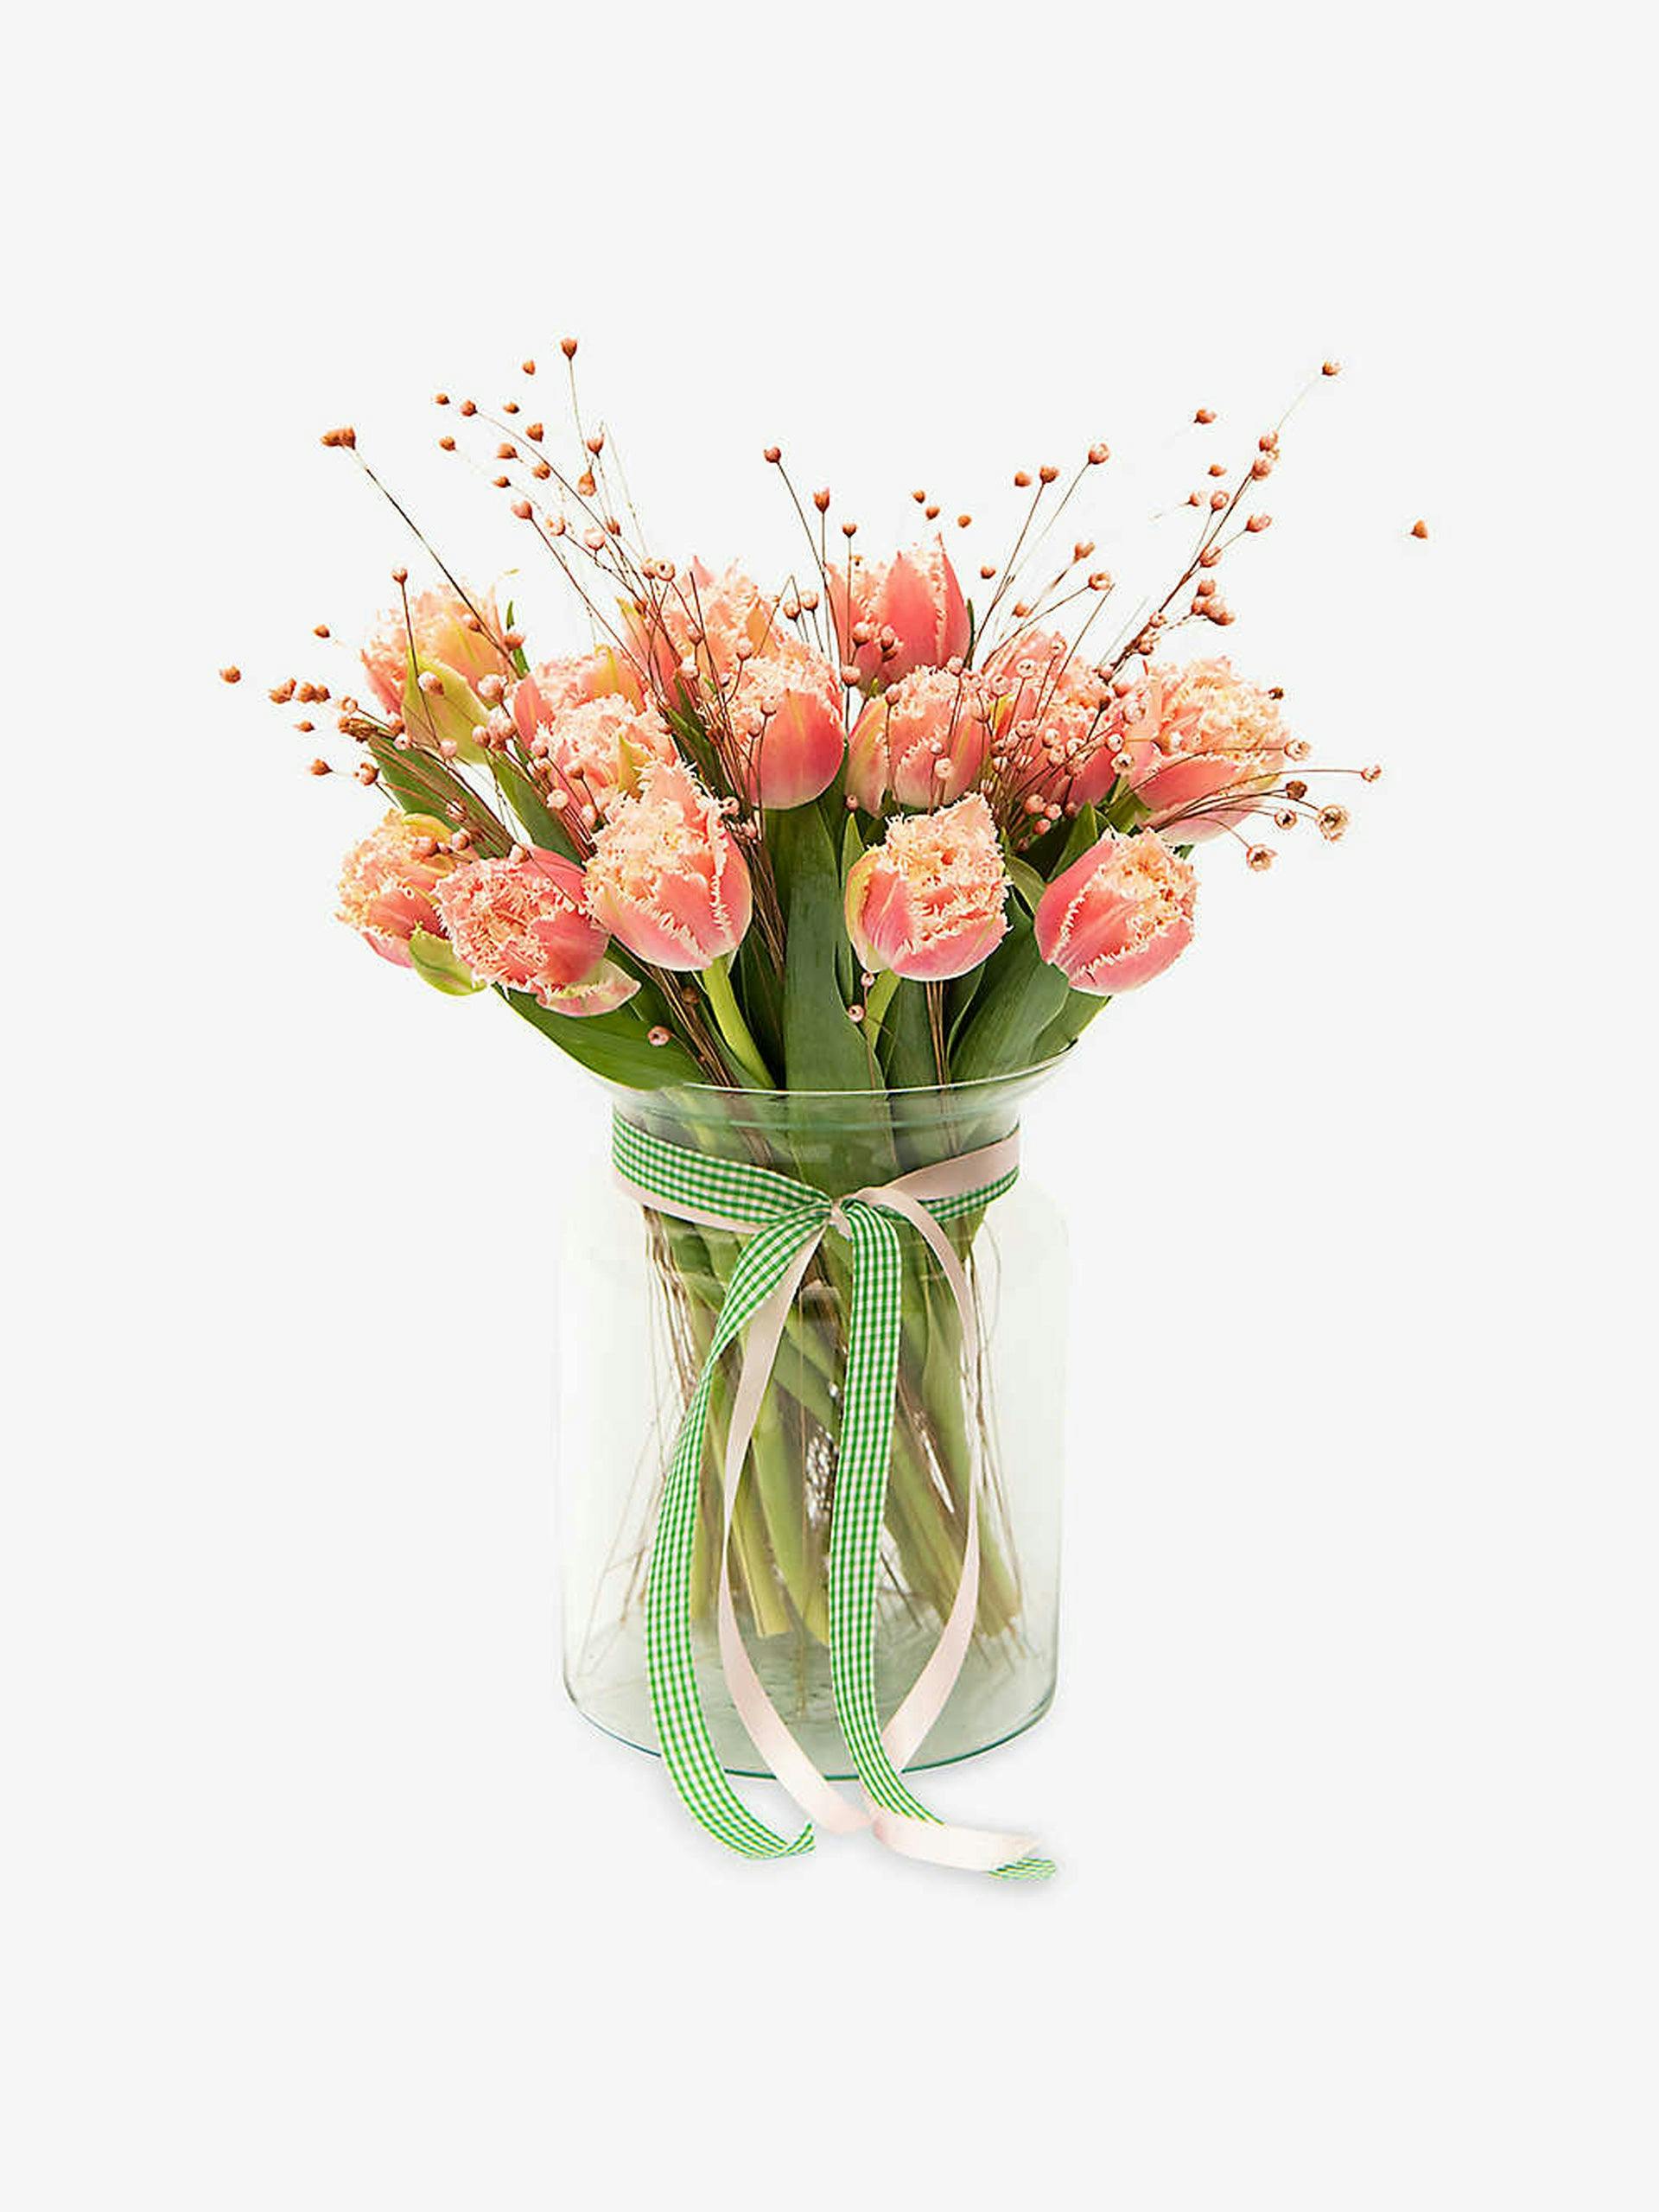 Turn to You mixed dried and fresh bouquet with vase